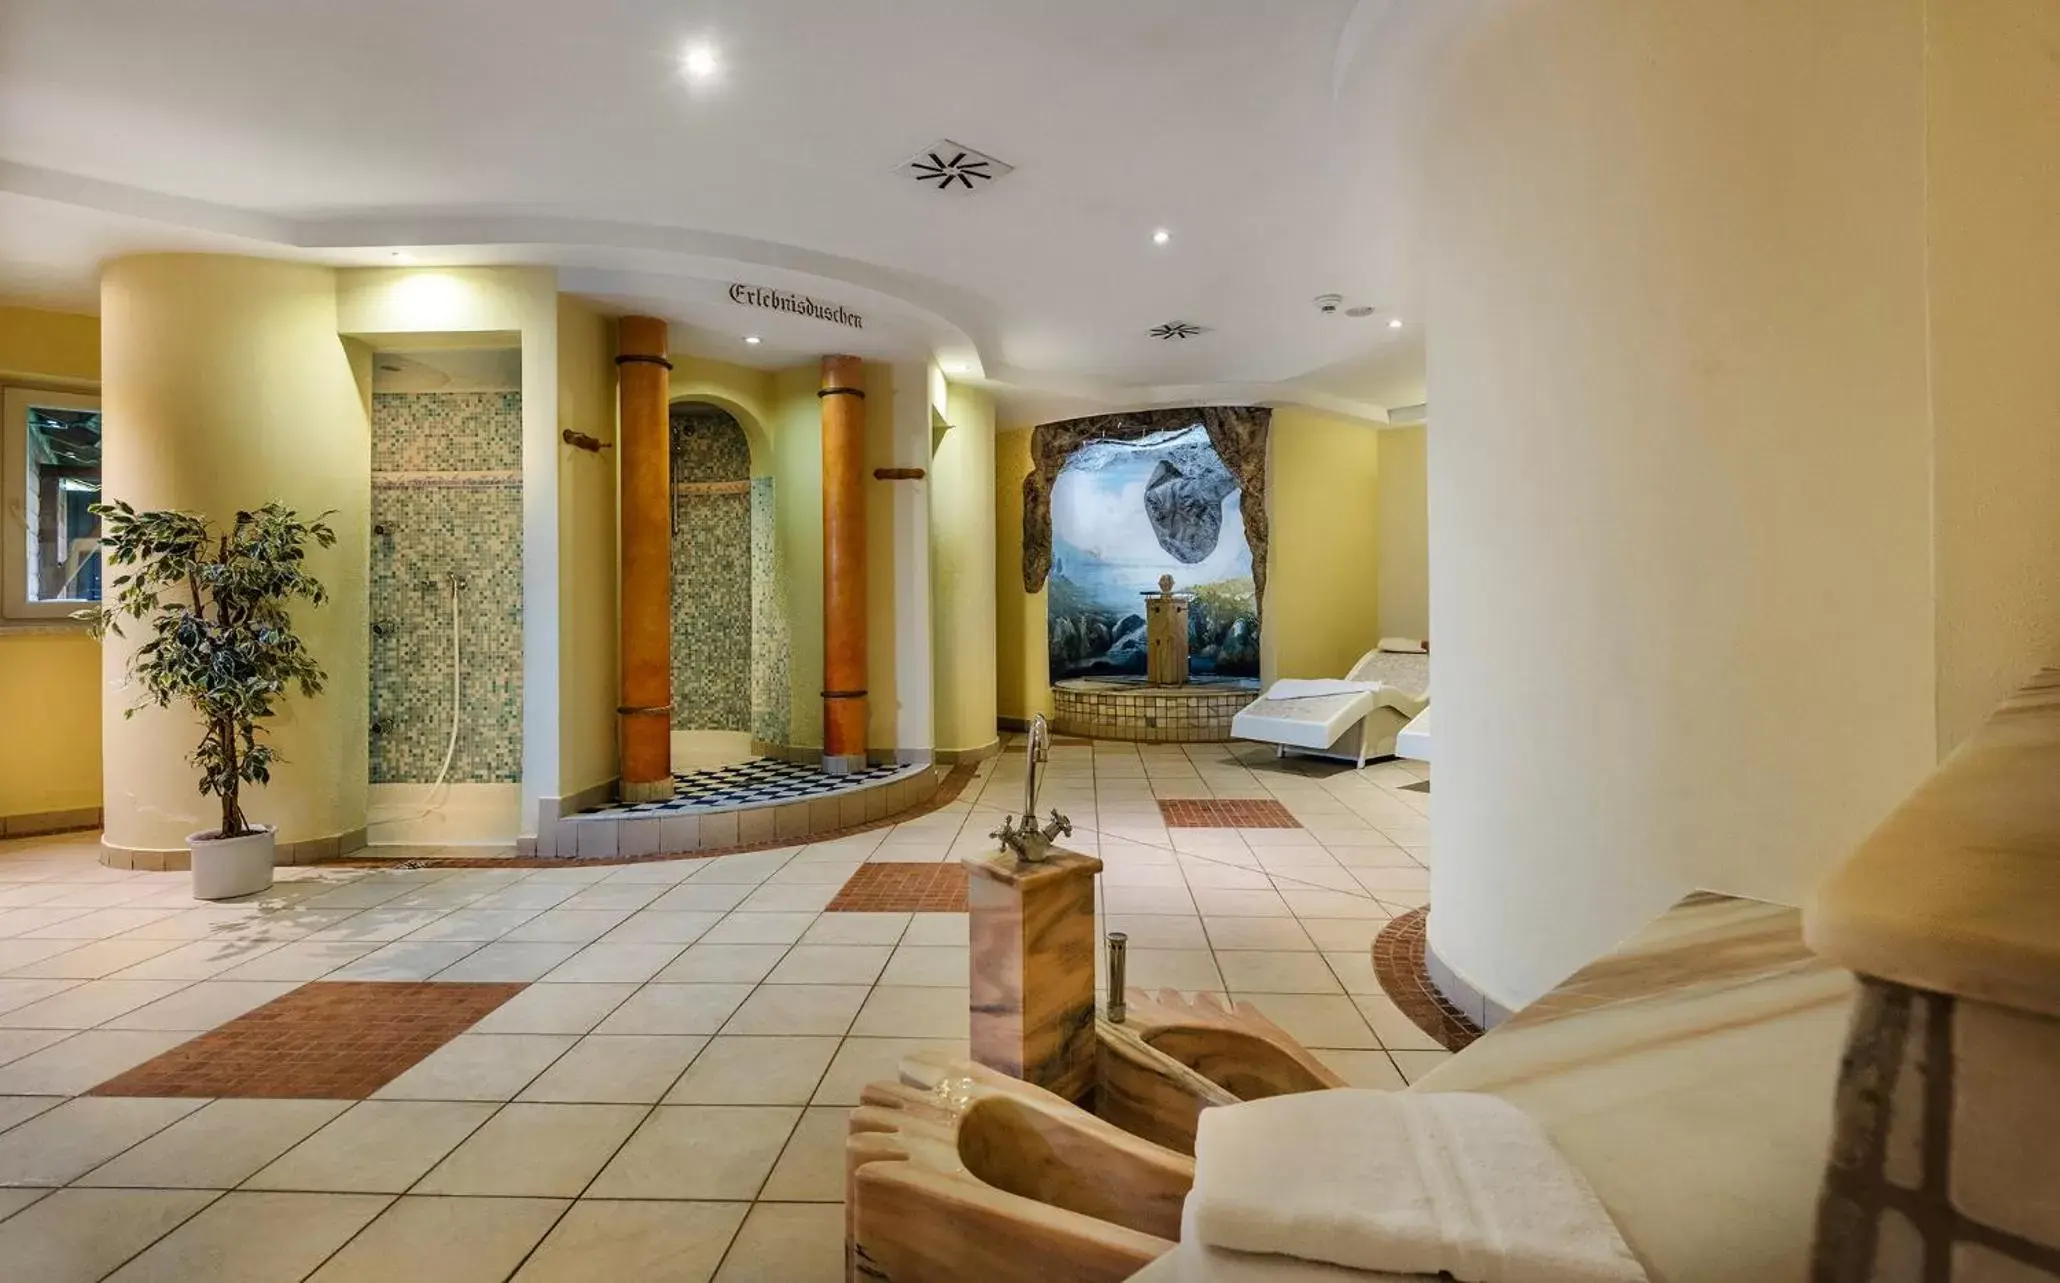 Spa and wellness centre/facilities in Johannesbad Hotel Palace - Kinder bis 11 kostenfrei